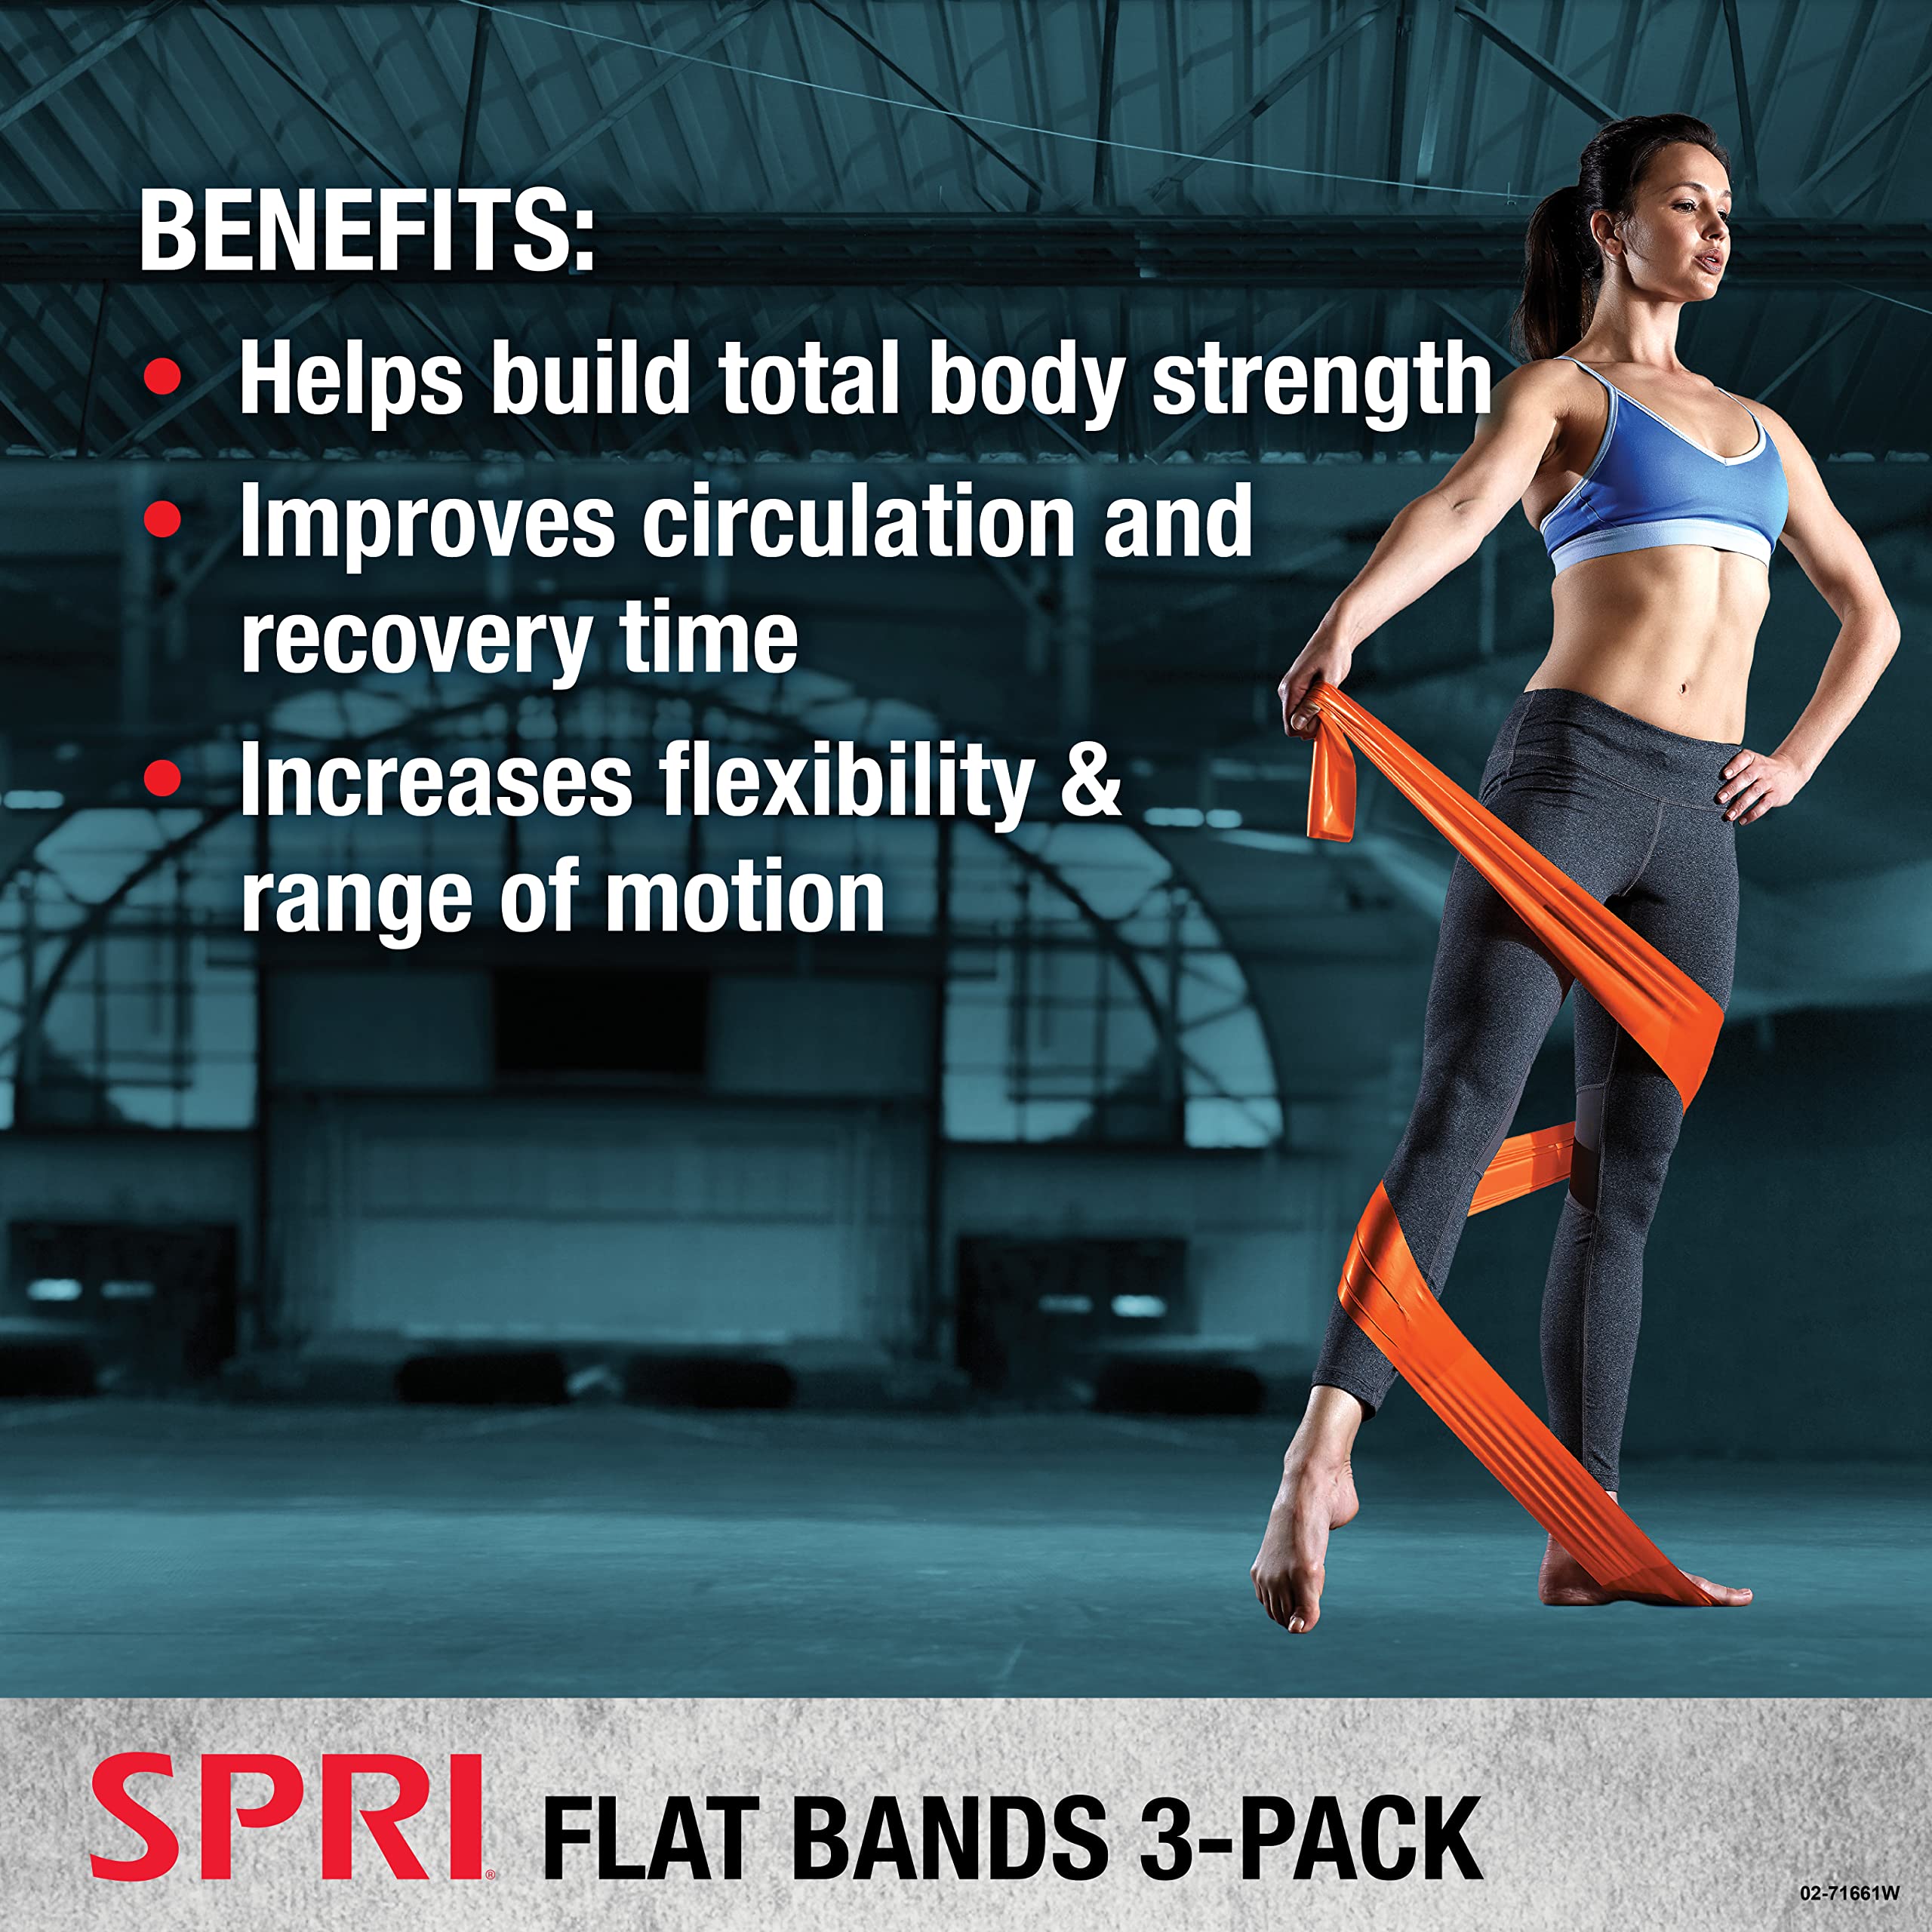 SPRI Flat Bands 3-Pack - Resistance Band Kit Set with 3 Levels of Resistance - Exercise Bands for Strength Training, Flexibility, & Body Workout - Versatile Fitness Tool - Light, Medium, and Heavy